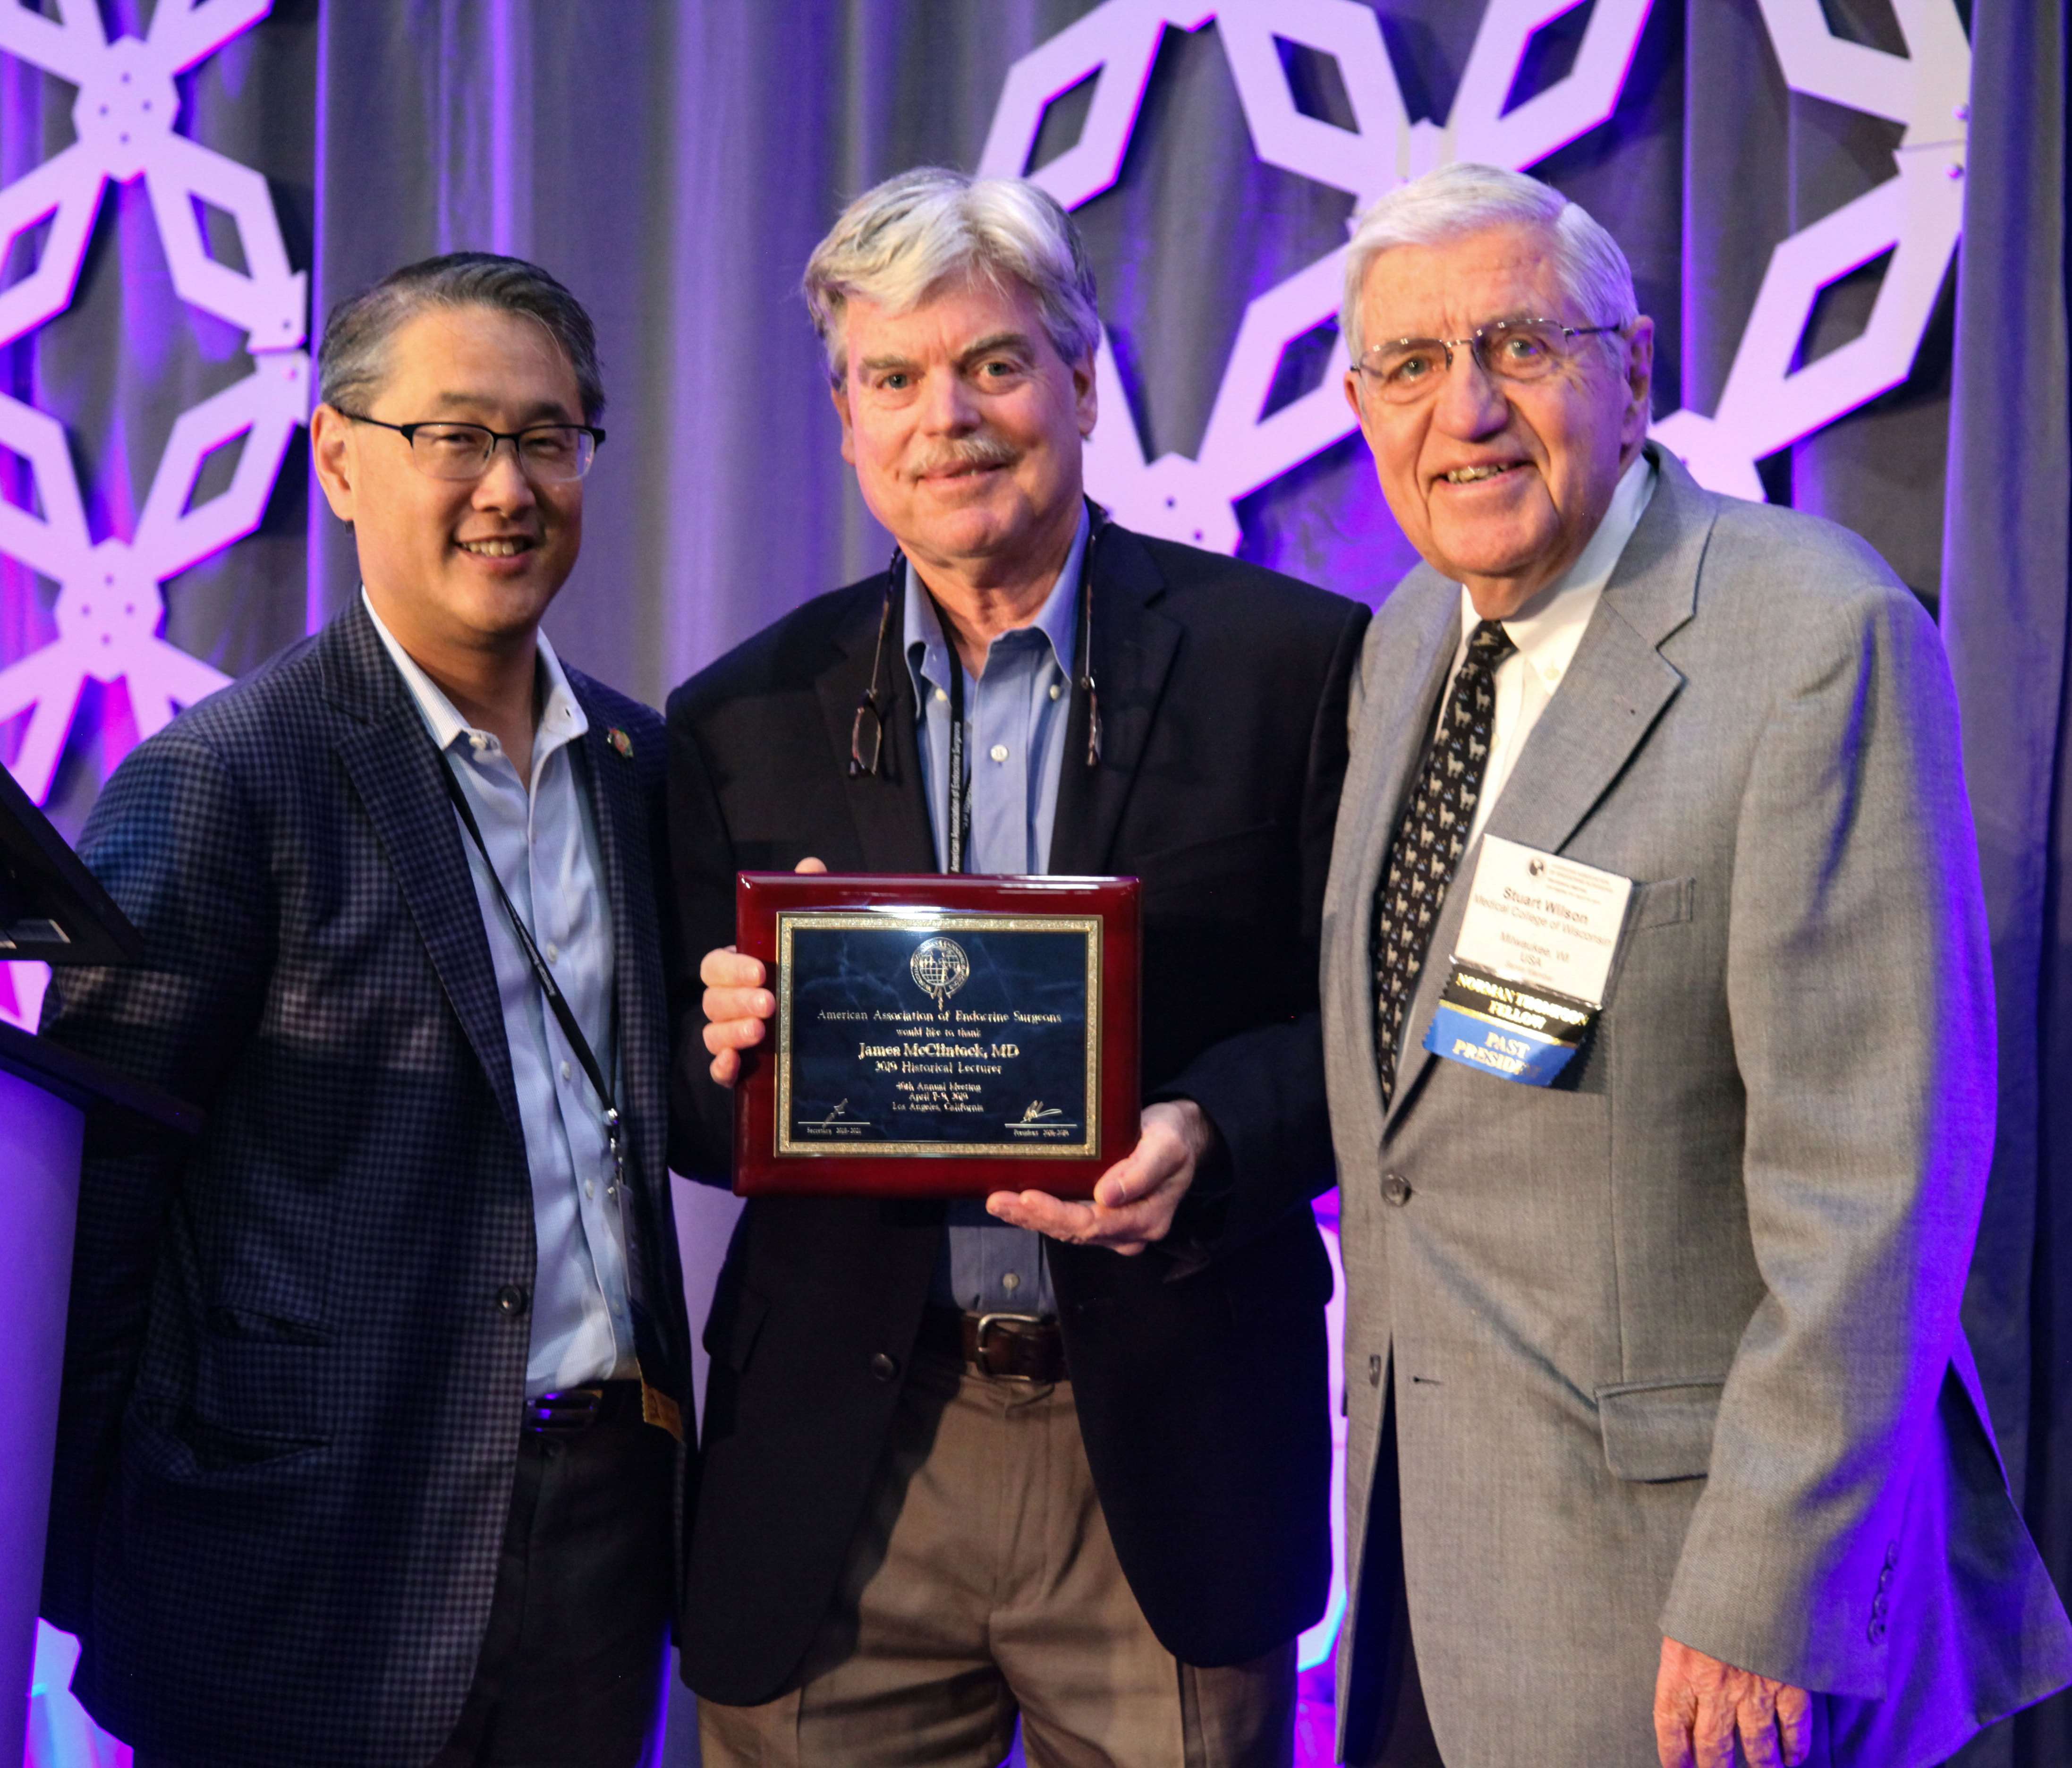 Drs. Chen, McClintock and Wilson at 2019 AAES Conference